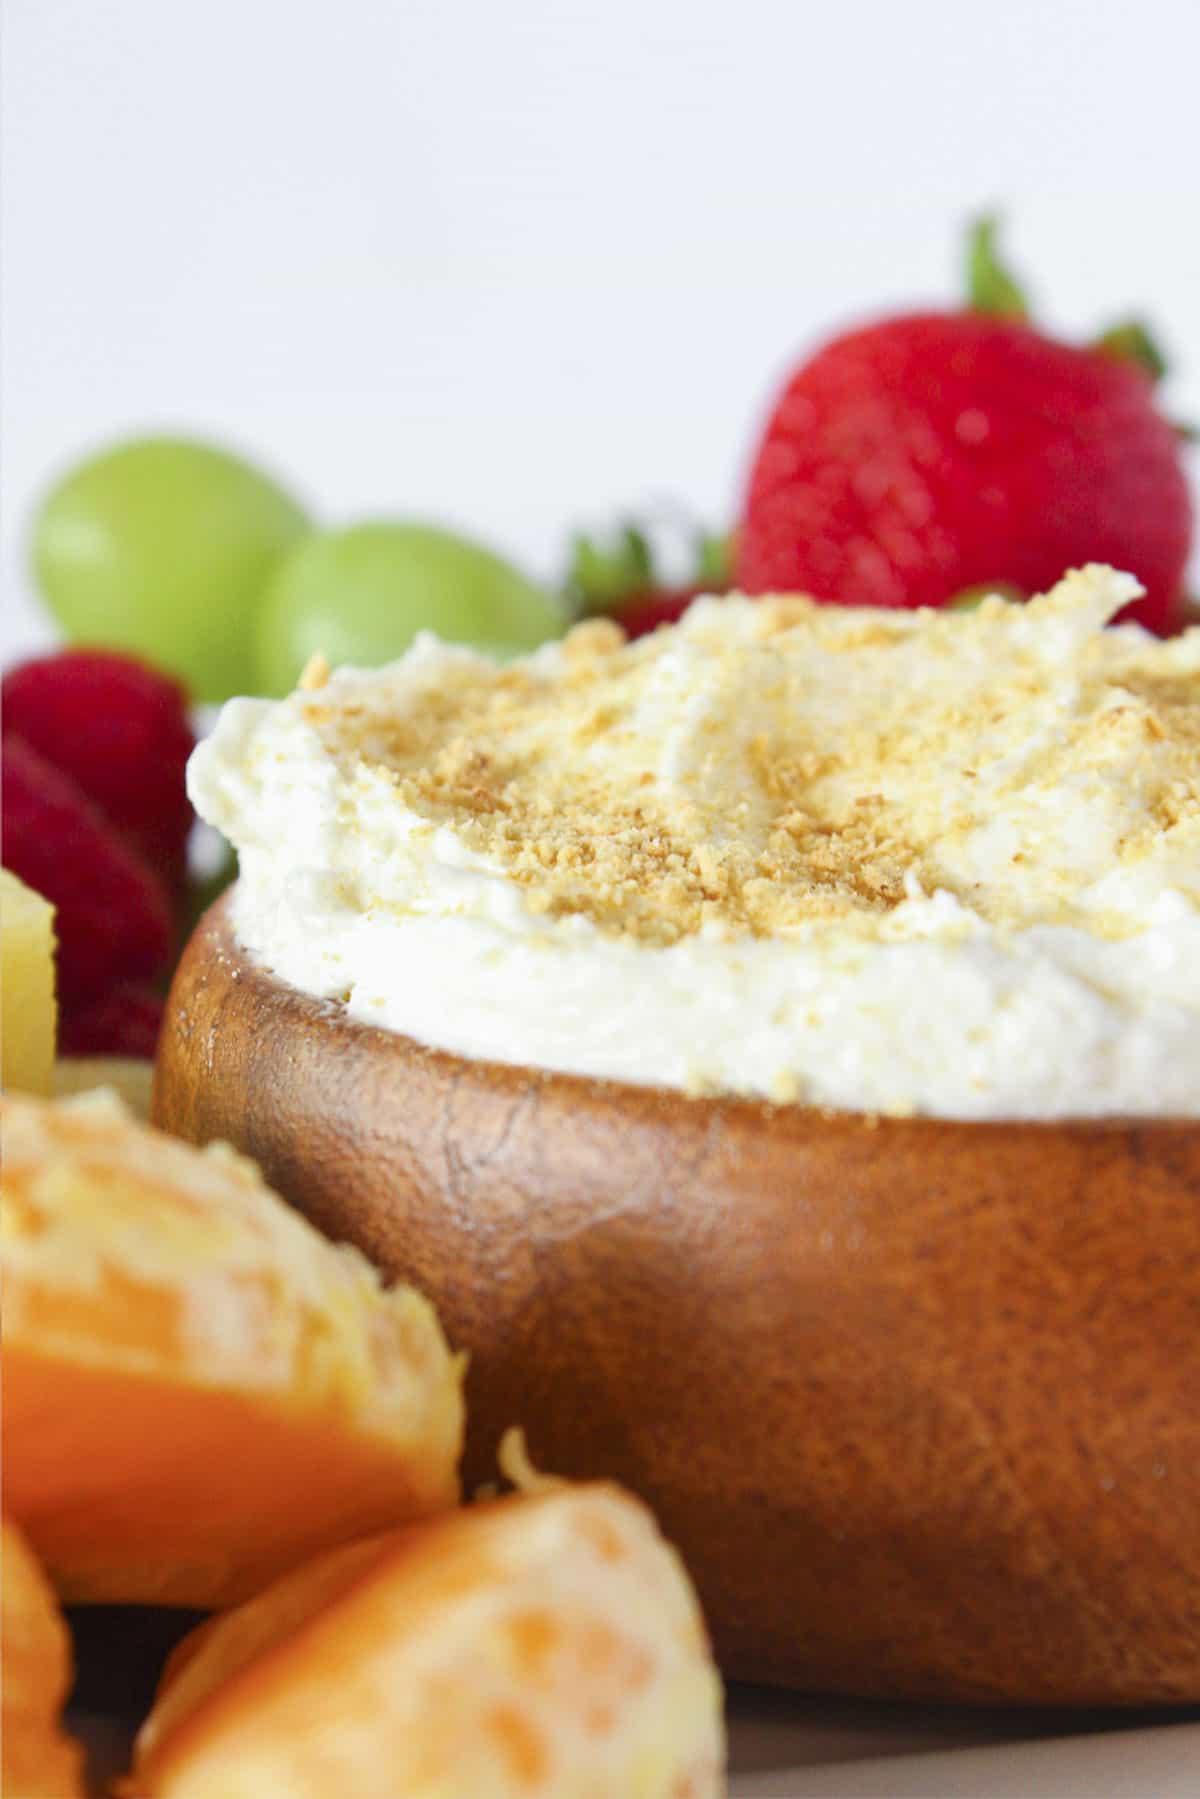 Cheesecake dip for fruit in a wood bowl and served with fresh fruit.